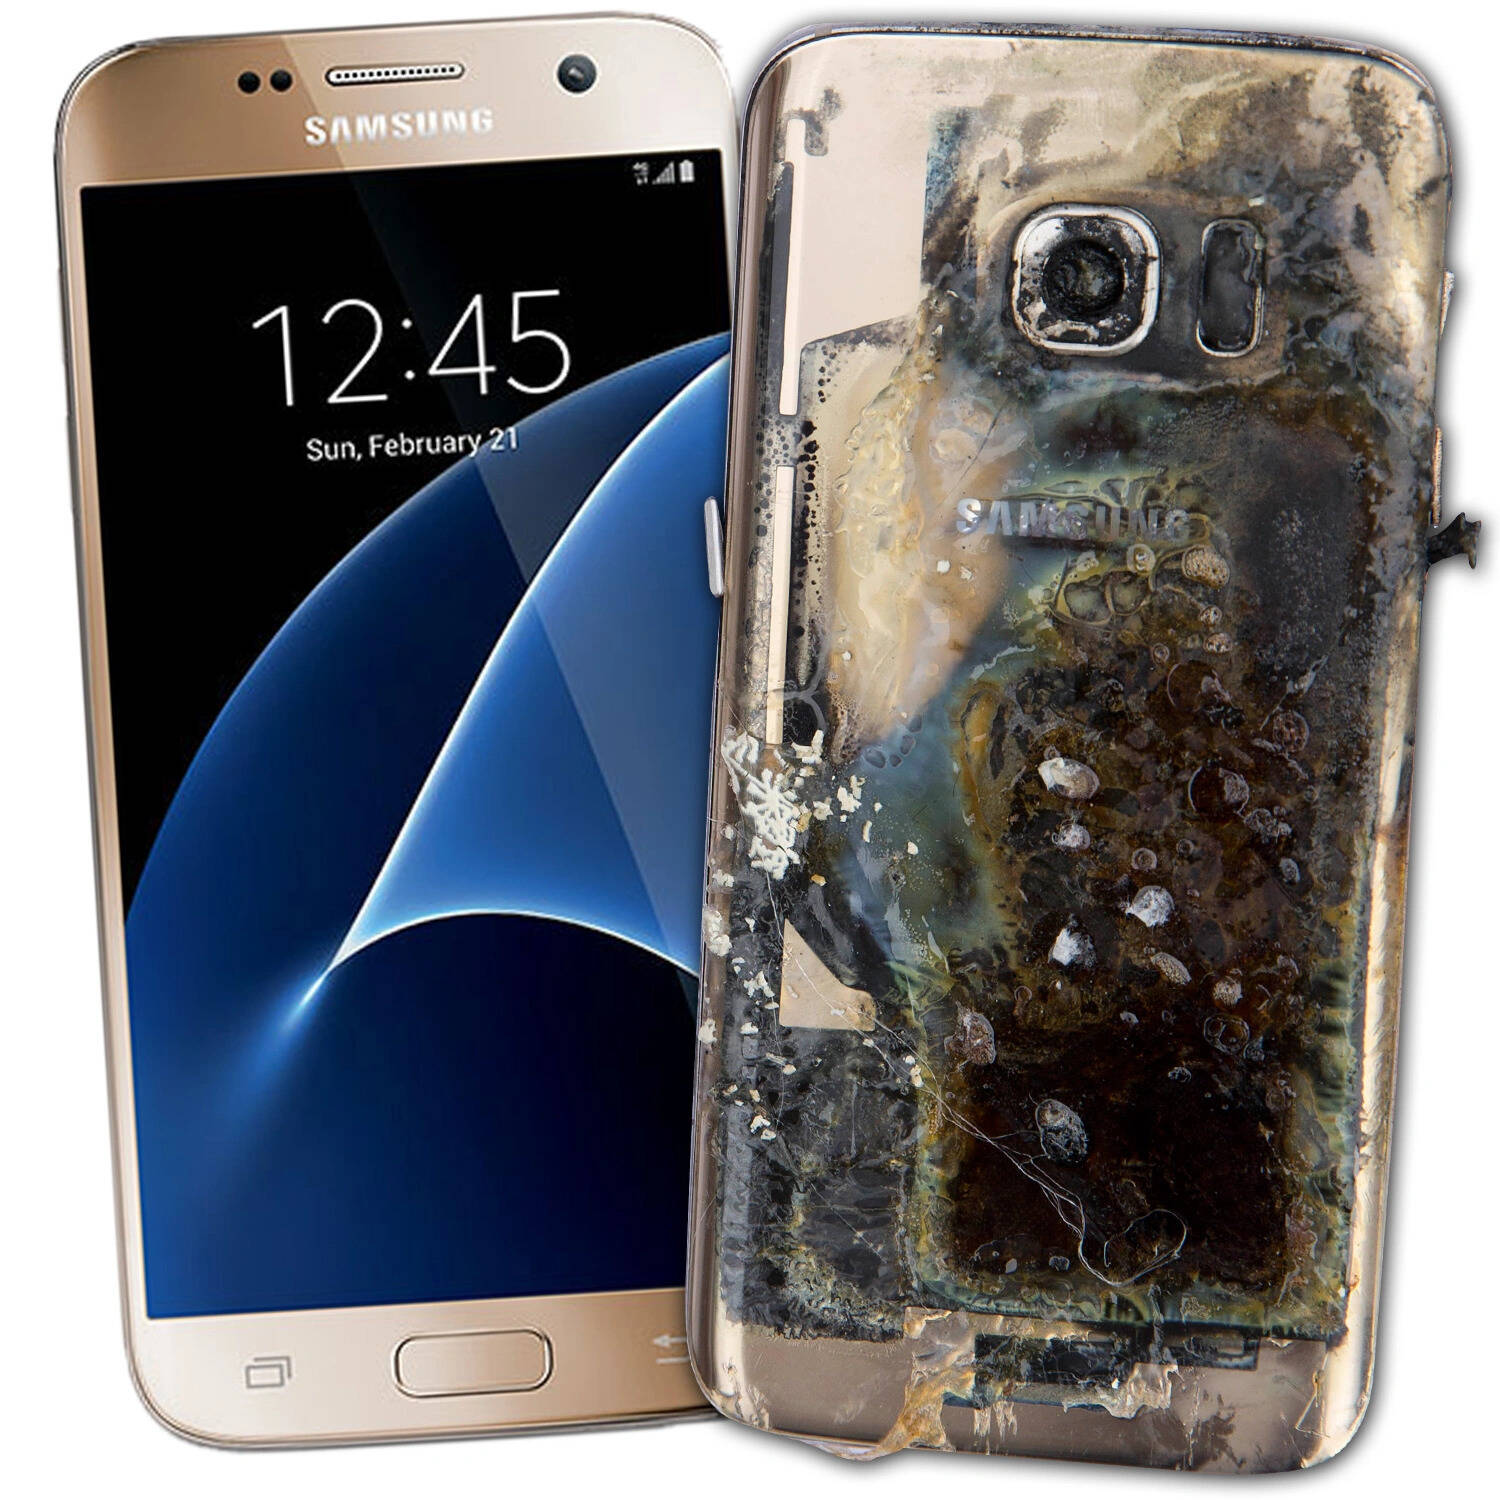 samsung-s7-edge-explodes-in-middle-of-busy-cafe